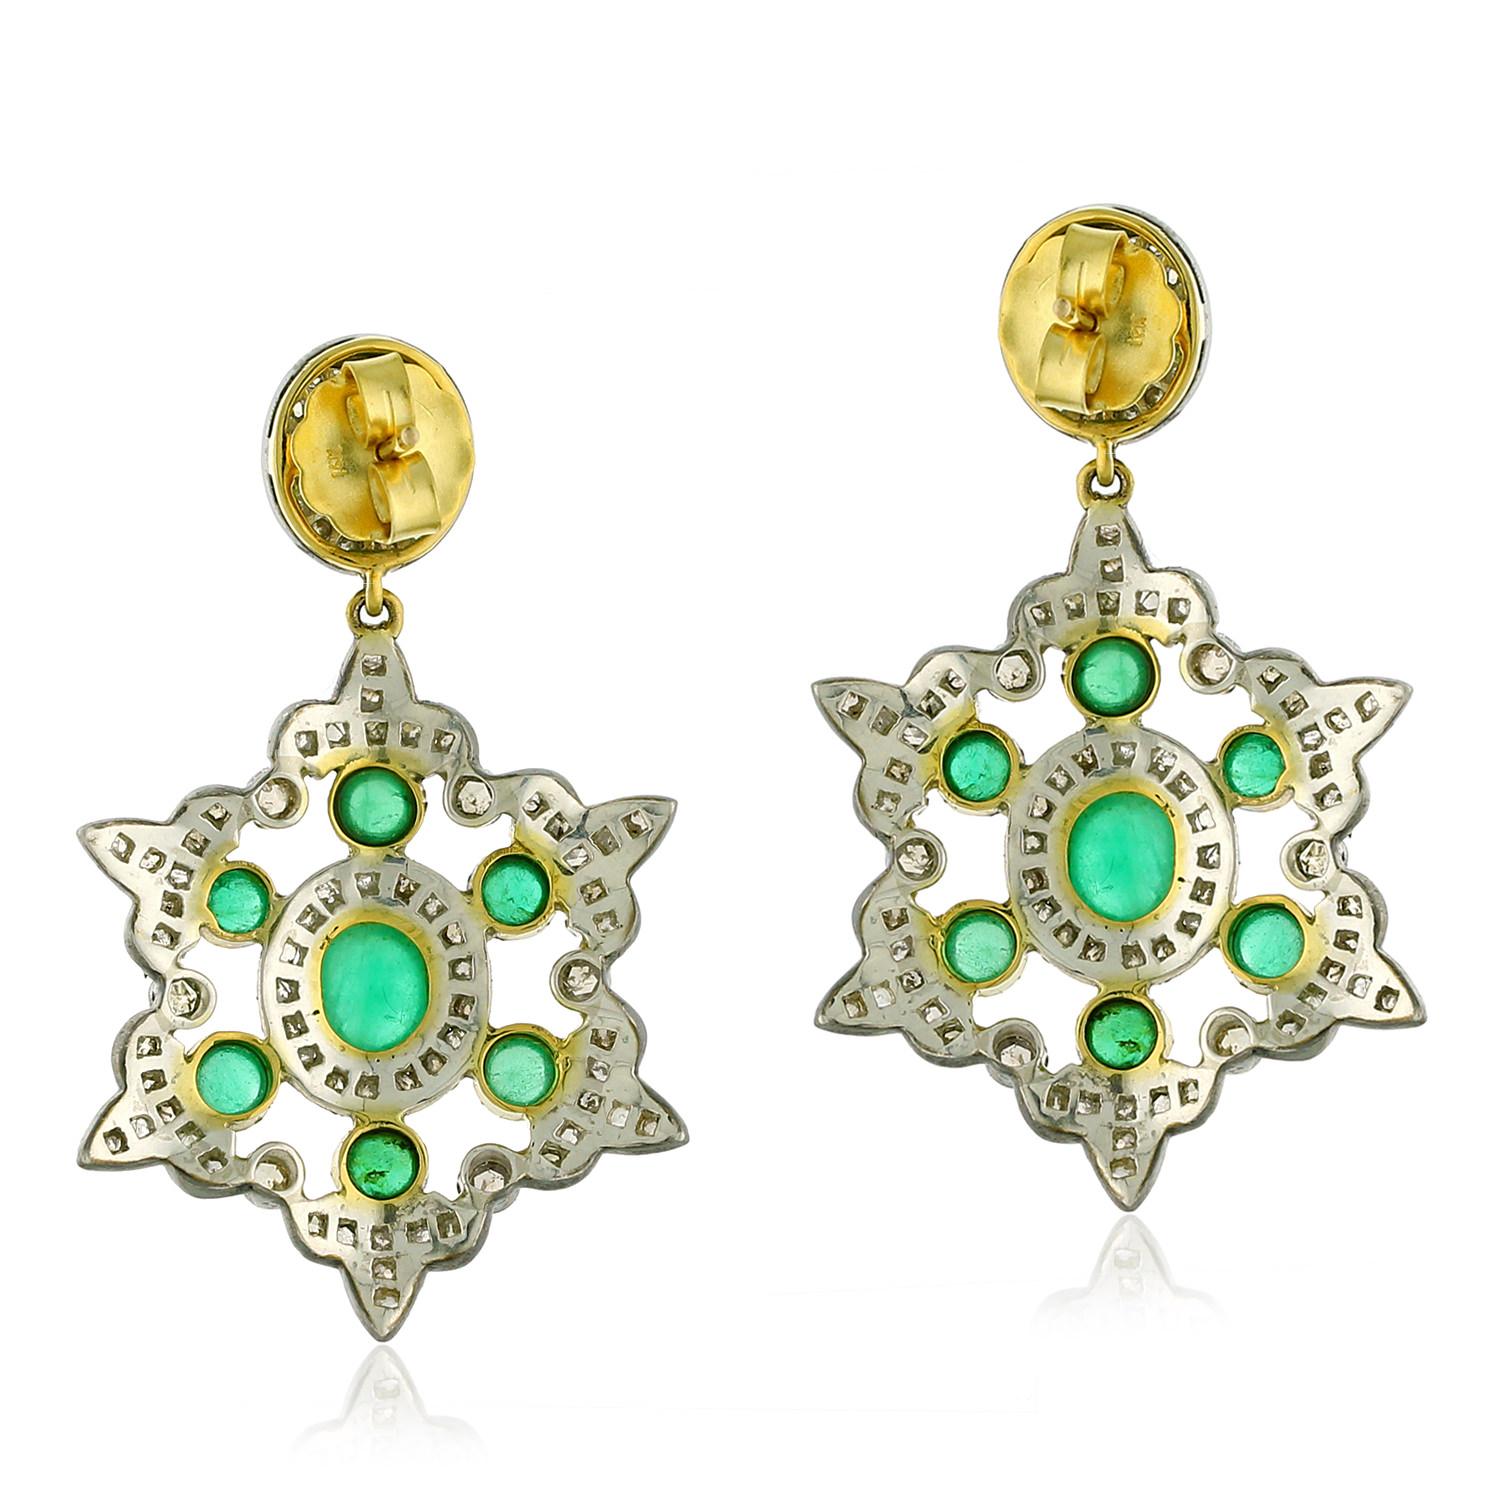 These elegant snow flake shaped earrings are a winter wonder! The delicate gold and silver design is accented with sparkling emeralds and pave diamonds. These earrings are sure to become a staple in your jewelry box. So, don't wait and grab your